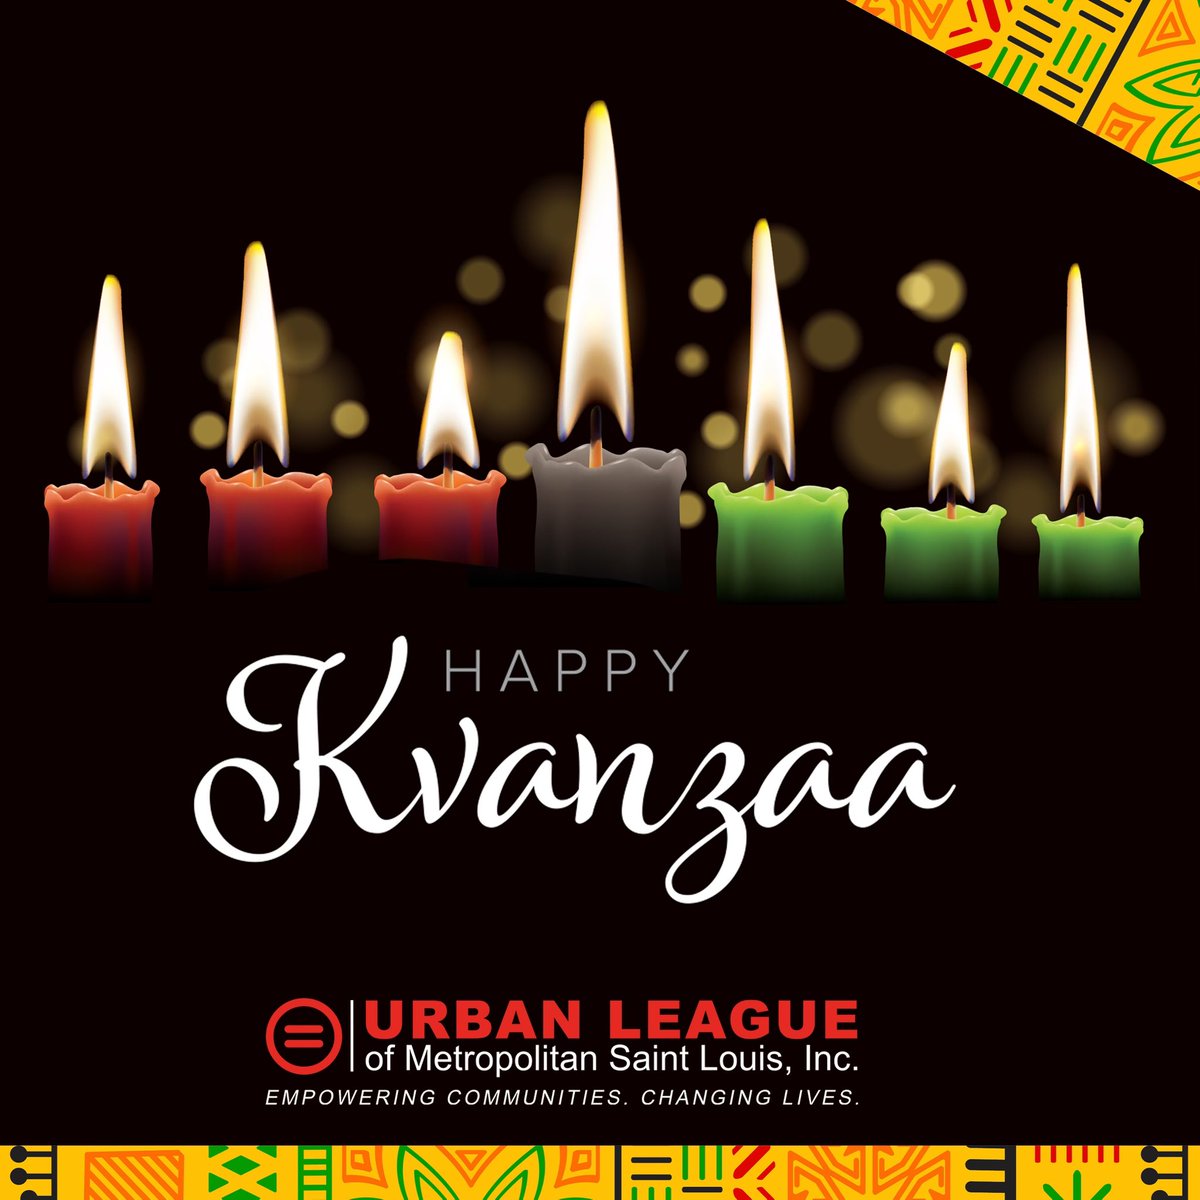 Happy Kwanzaa! May this #festive season fill your home with joy, your heart with #love, and your life with laughter. Wishing you and your loved ones a very #joyful and meaningful #Kwanzaa celebration! #ULSTL